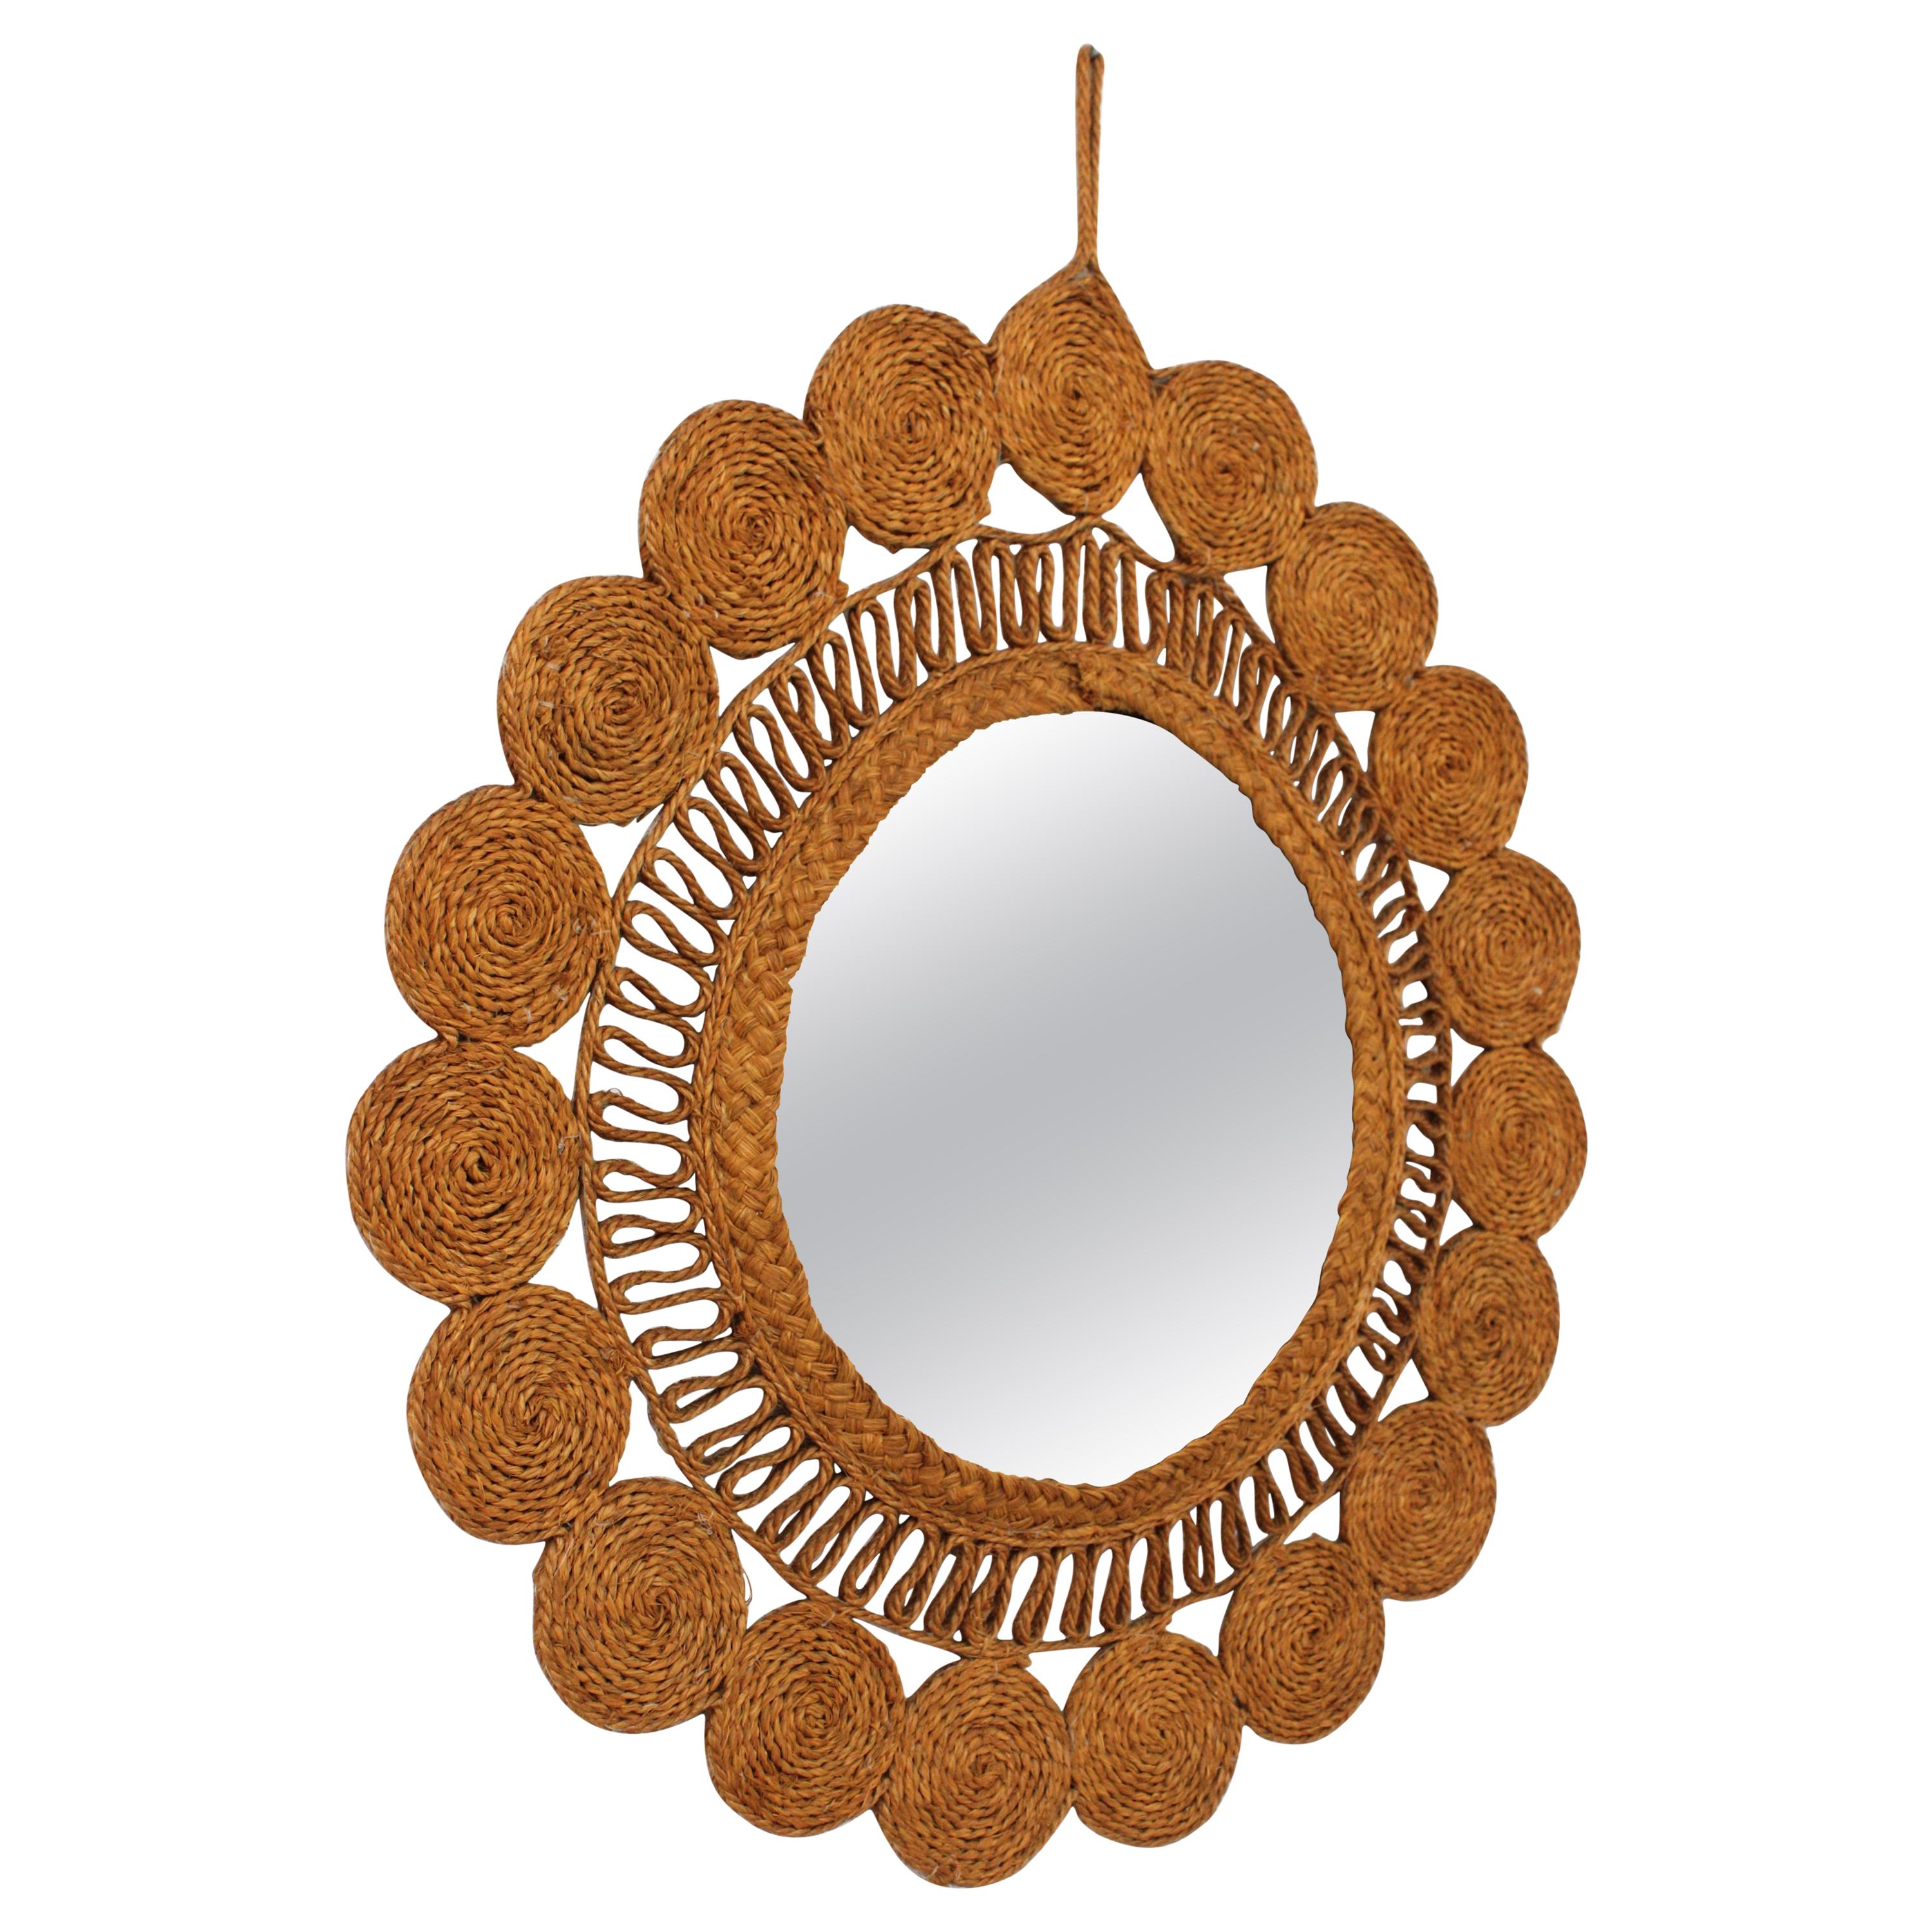 Artisan Handwoven rustic wall mirror, esparto grass and rope, Spain, 1960s
This artisan mirror is made with esparto natural fiber. It features a sunburst or flower shaped frame surrounding a circular glass. A wavy rope pattern highligts the beauty